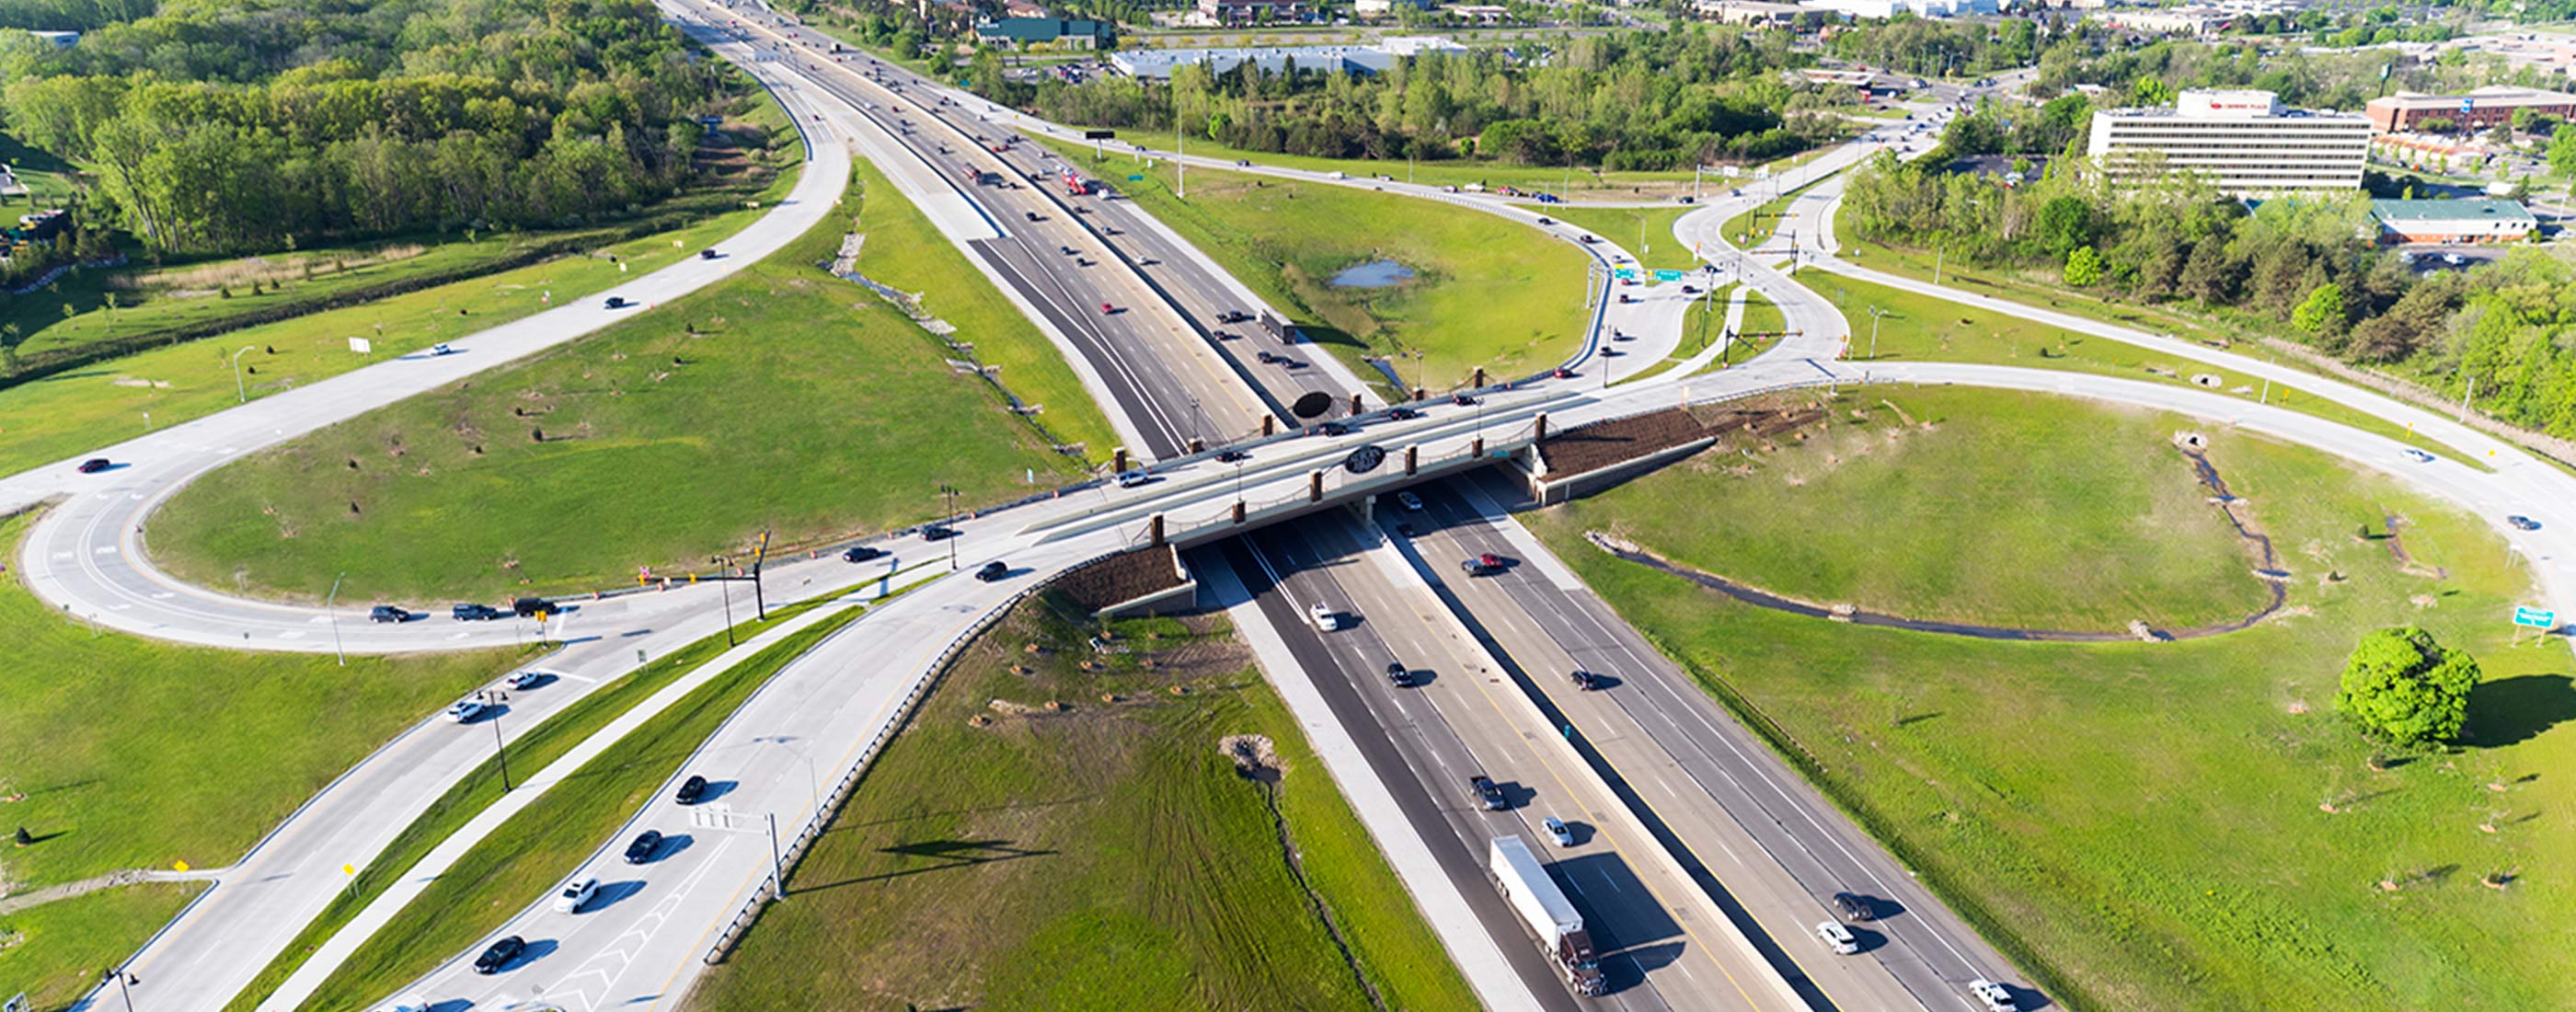 The Diverging Diamond Interchange located at Auburn Hills, MI’s I-75 and University Drive improves traffic flow and safety.